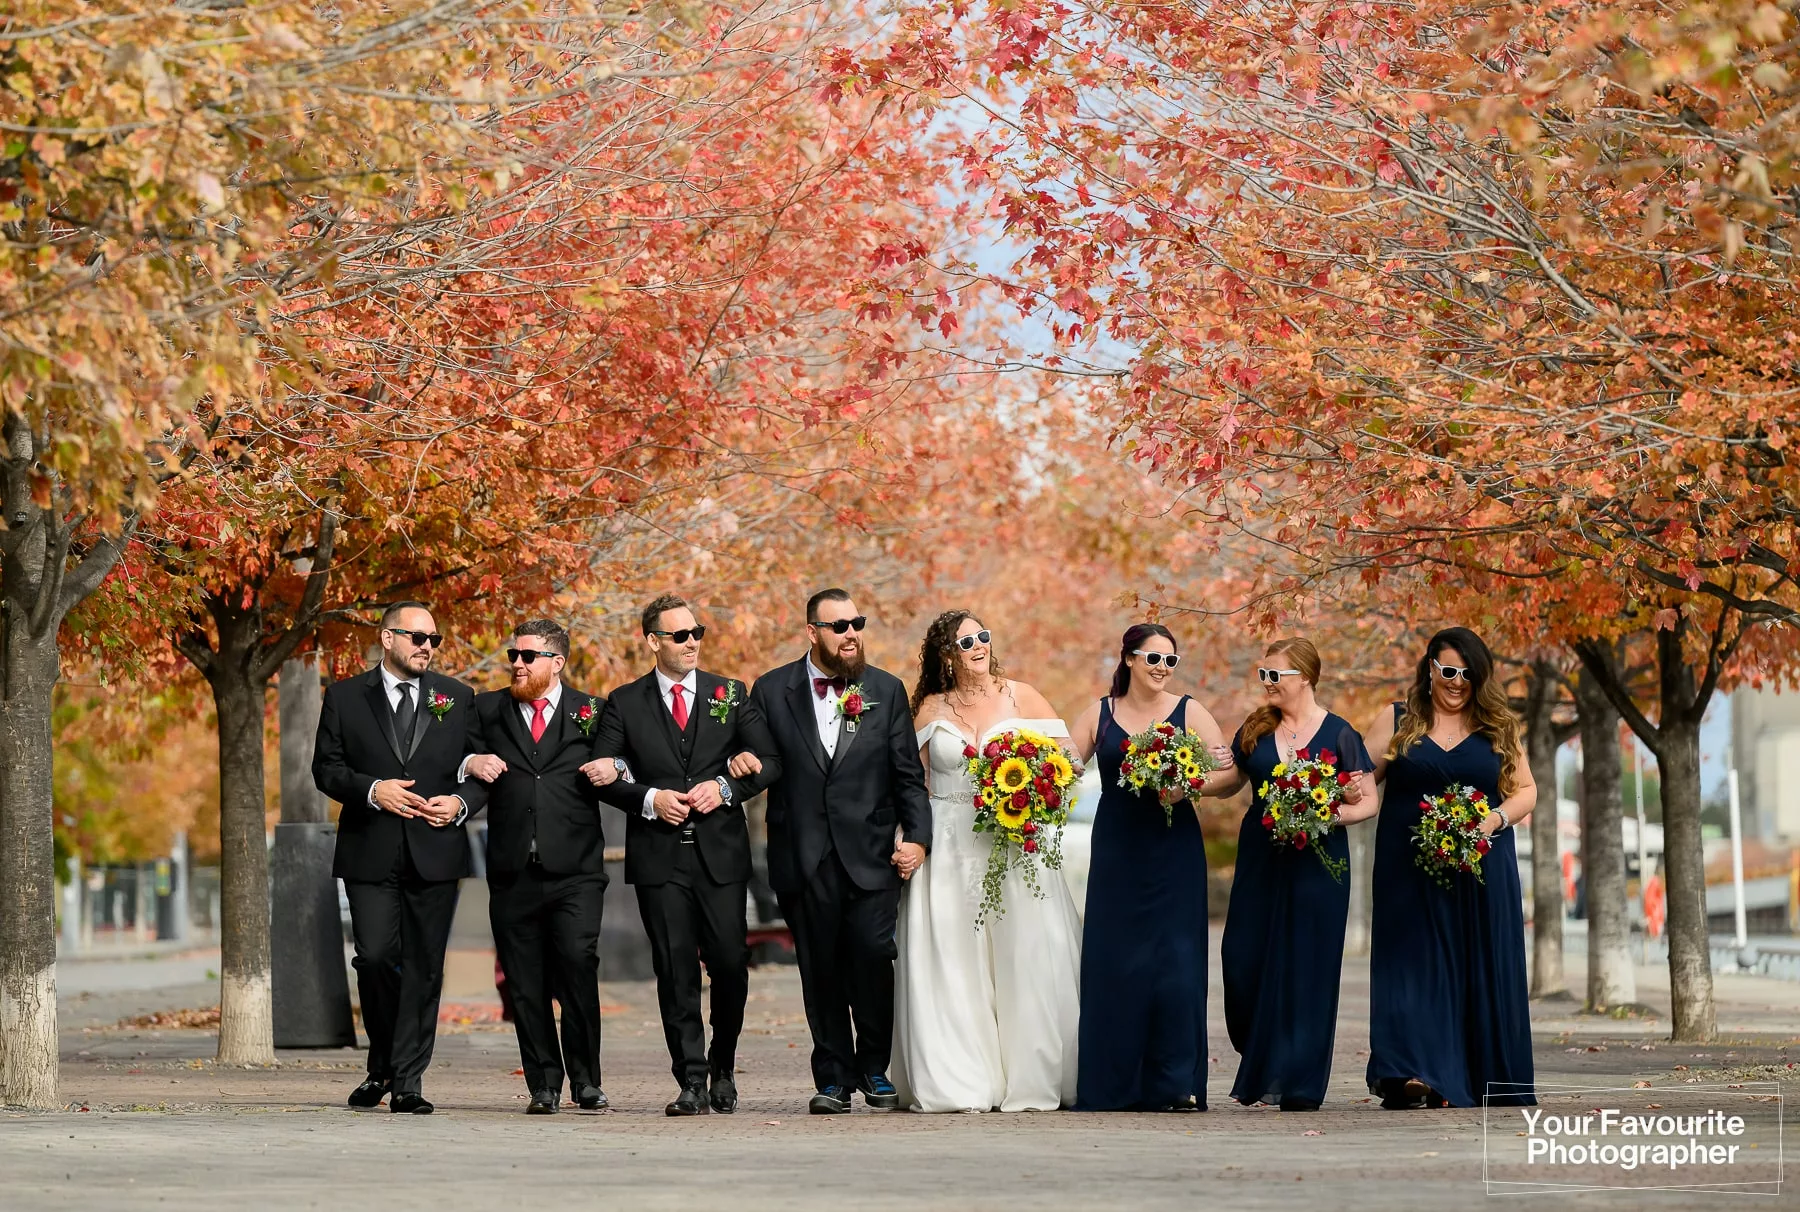 Wedding party wearing sunglasses walks down the Water's Edge Promenade in downtown Toronto, surrounded by fall foliage